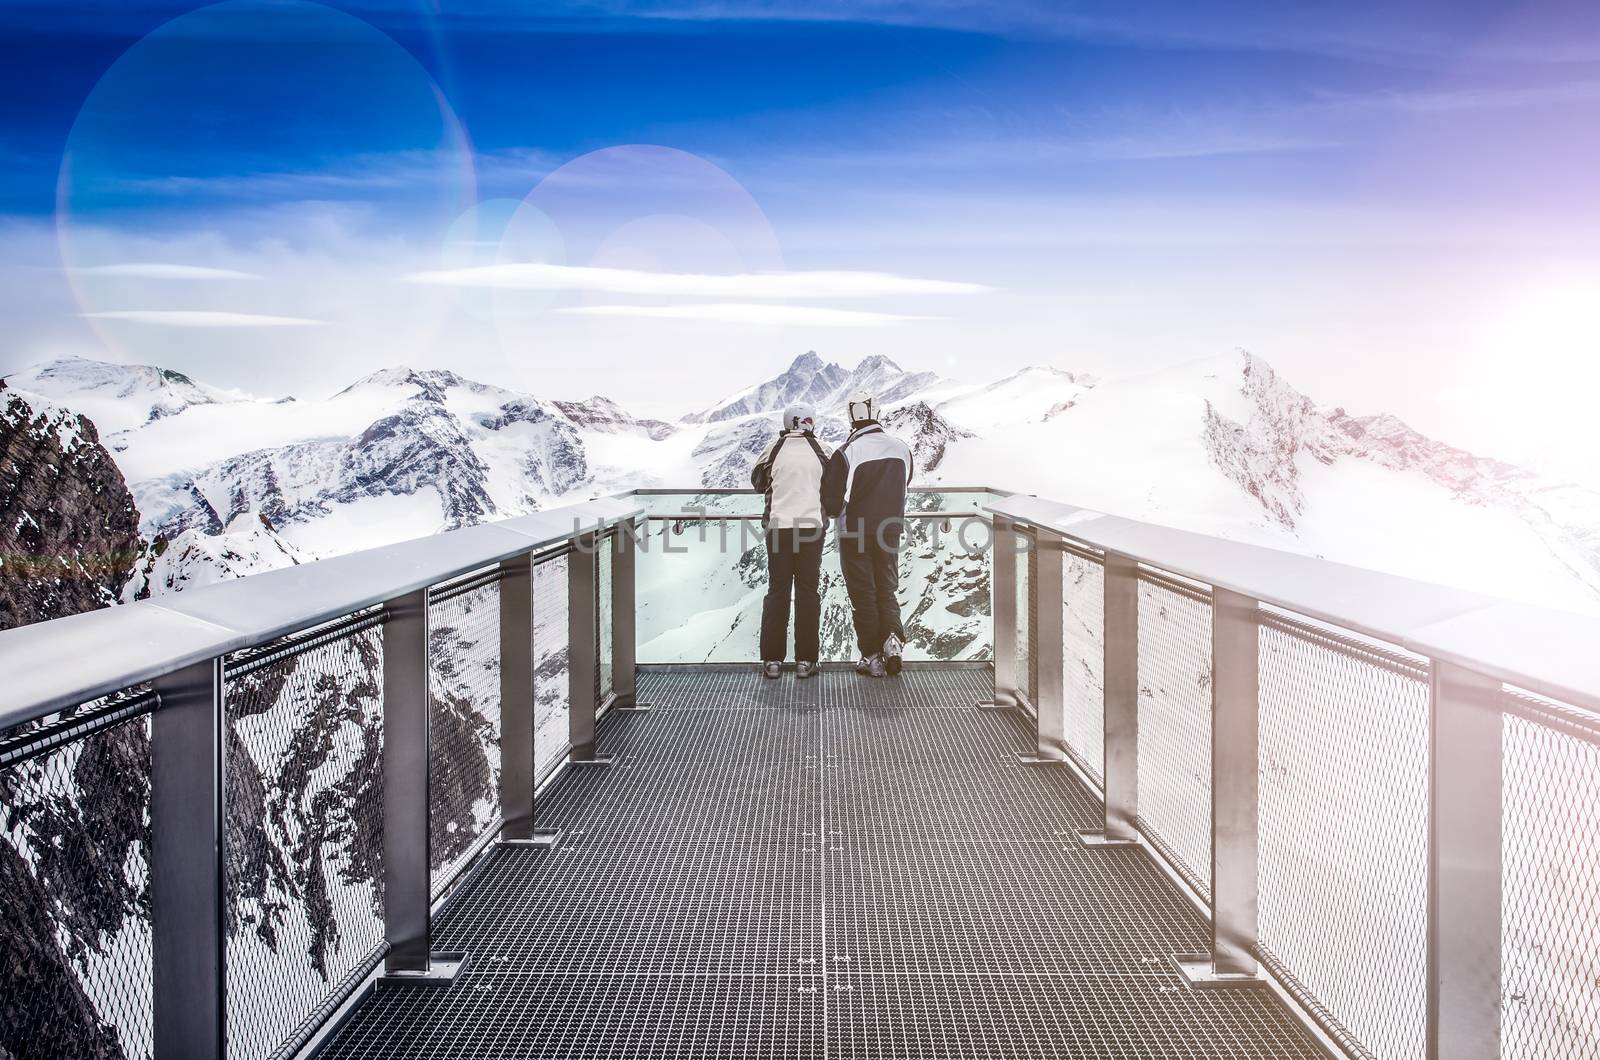 Two people looking at Alps mountains from viewpoint platform, Kaprun area, Austria